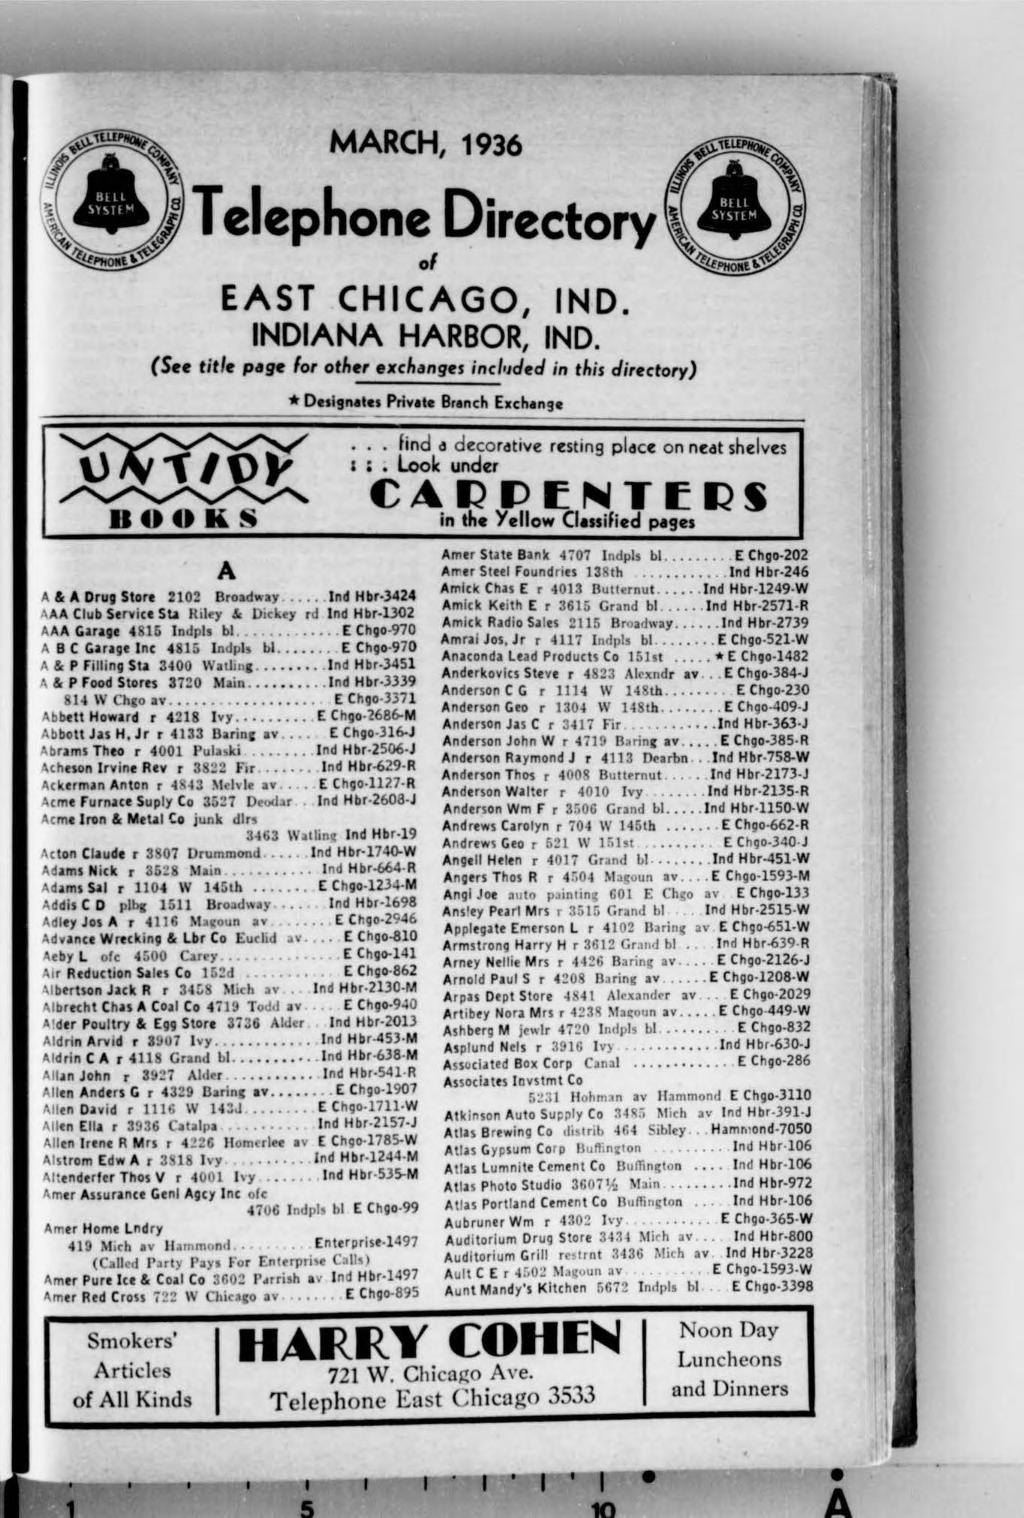 East Chicago Directory - March 1936 : Illinois Bell Telephone 